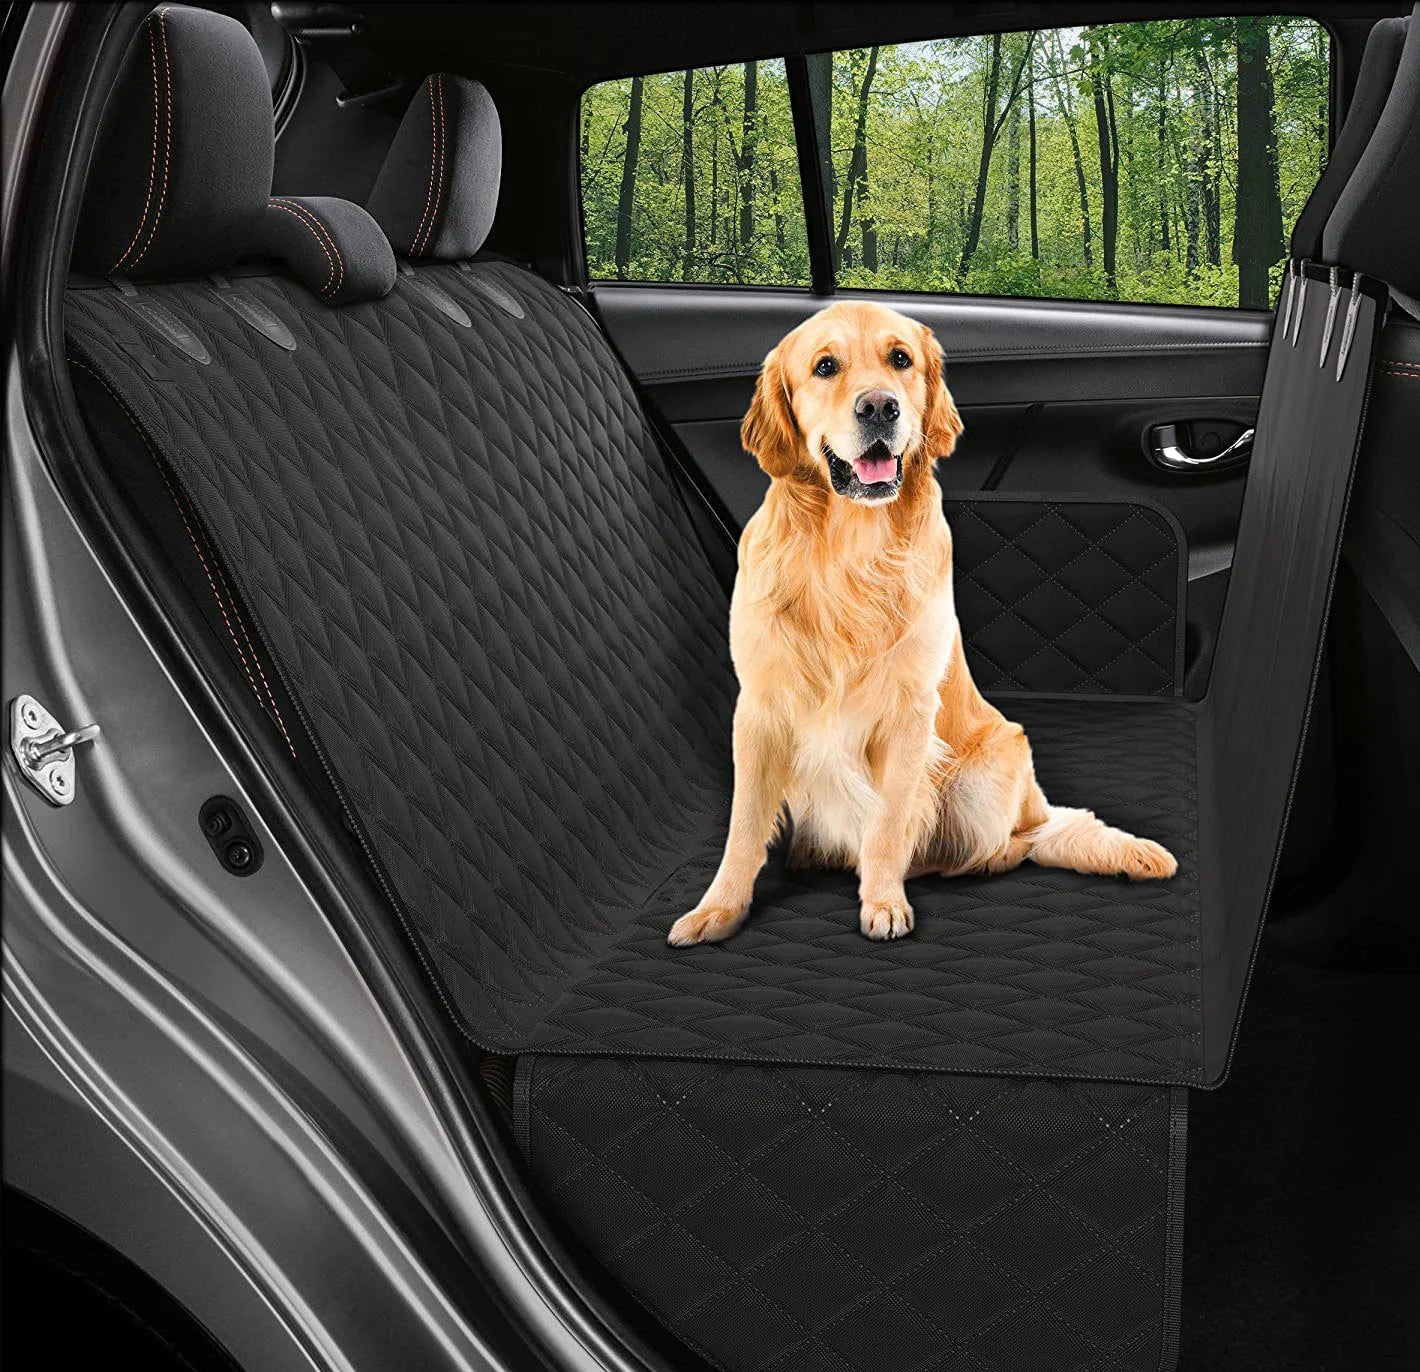 Waterproof Pet Travel Dog Carrier Hammock Car Rear Back Seat Protector Mat Safety Carrier Dog Car Seat Cover For Dogs - Bee's to Find